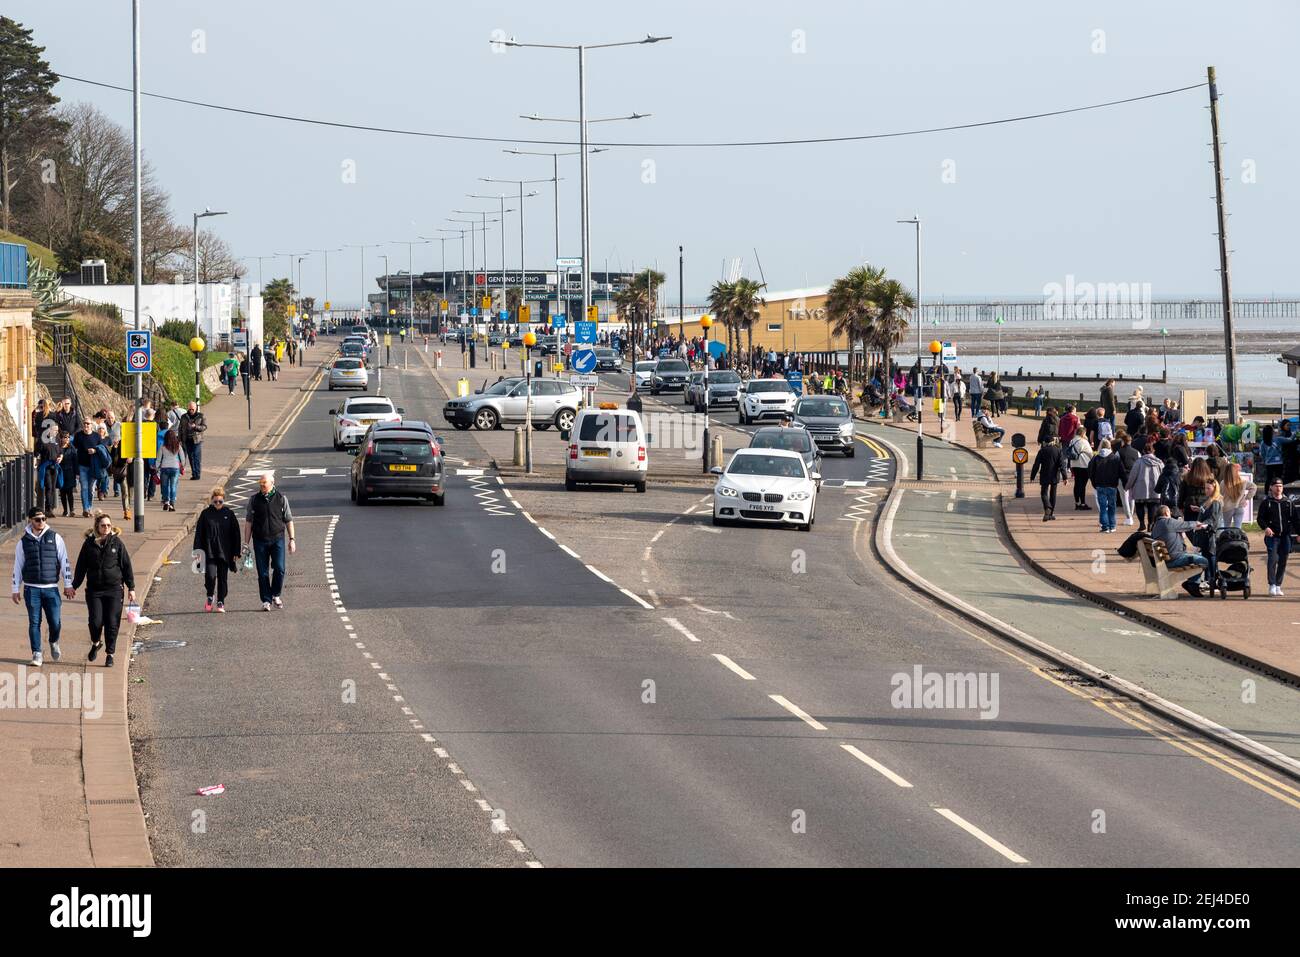 Southend on Sea, Essex, UK. 21st Feb, 2021. The warm and sunny weather has  brought people to the seafront at Southend on Sea despite the COVID 19  lockdown warnings. The seafront car